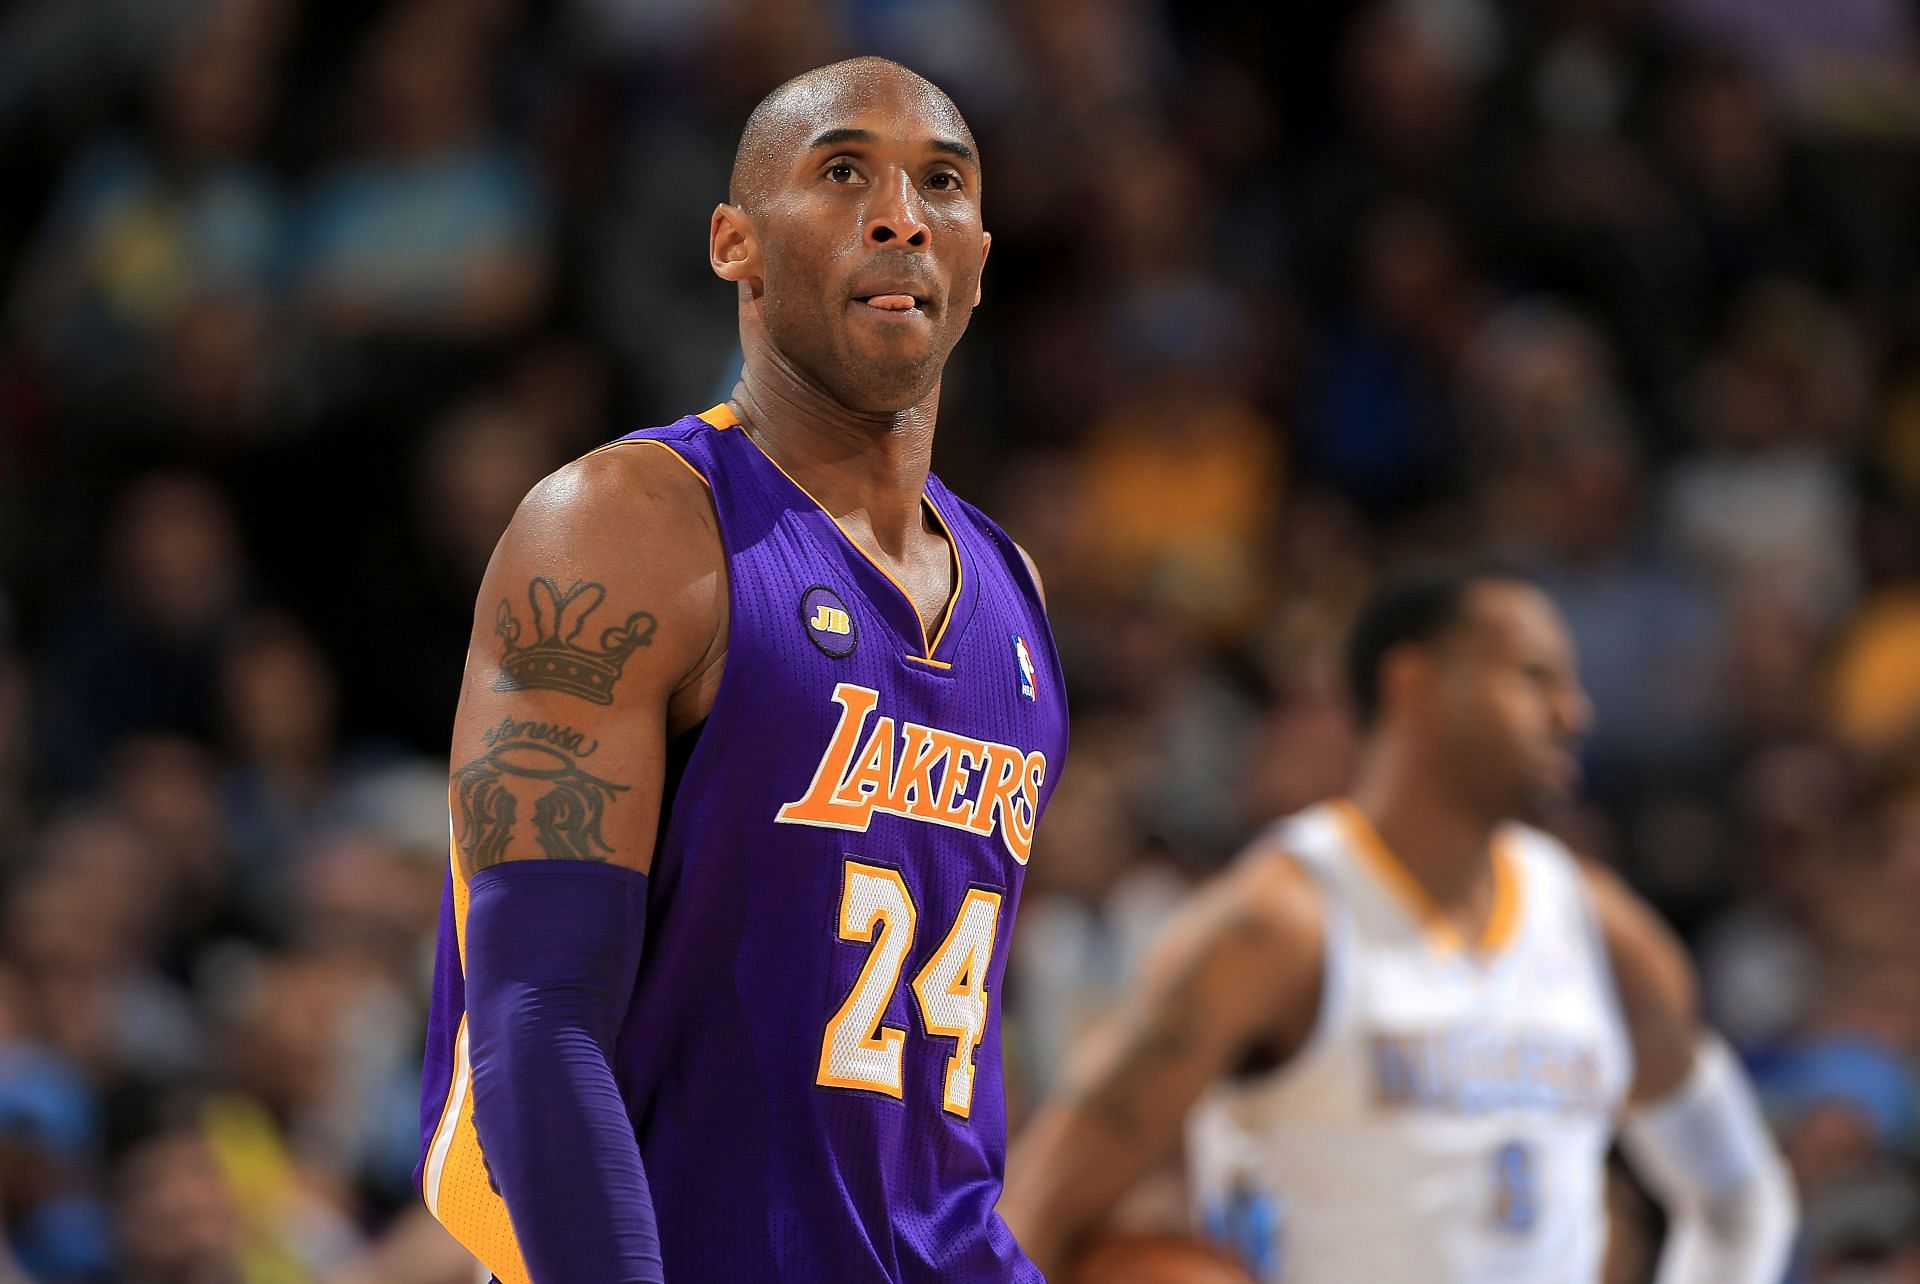 Kobe's legacy lives on as two new players bear his name • BusinessMirror